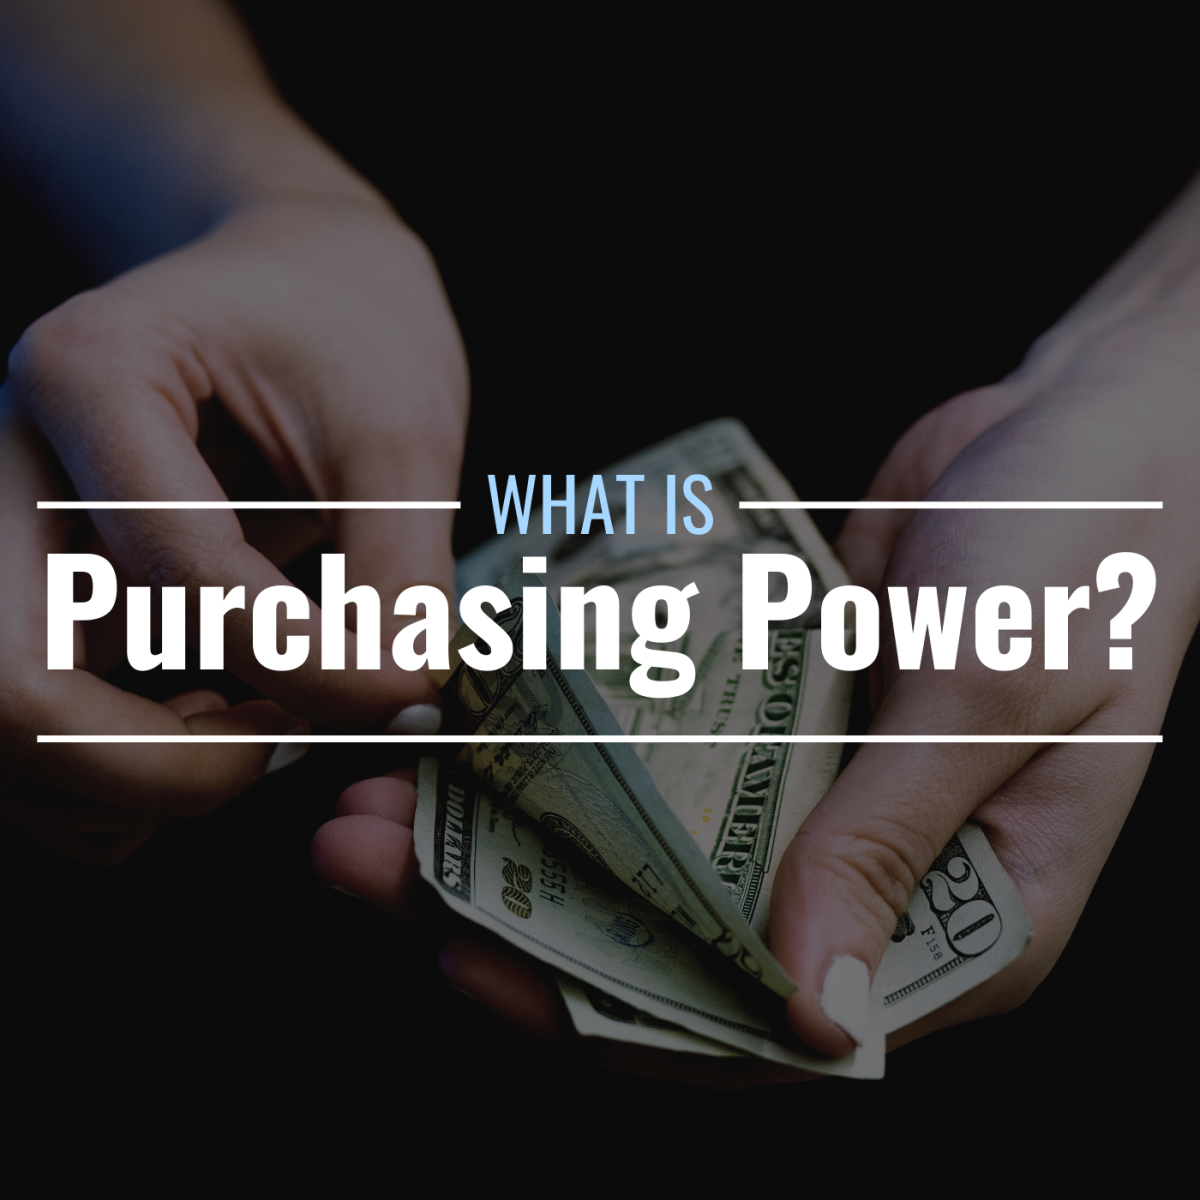 Darkened photo of a pair of hands counting bills of cash with text overlay that reads "What Is Purchasing Power?"